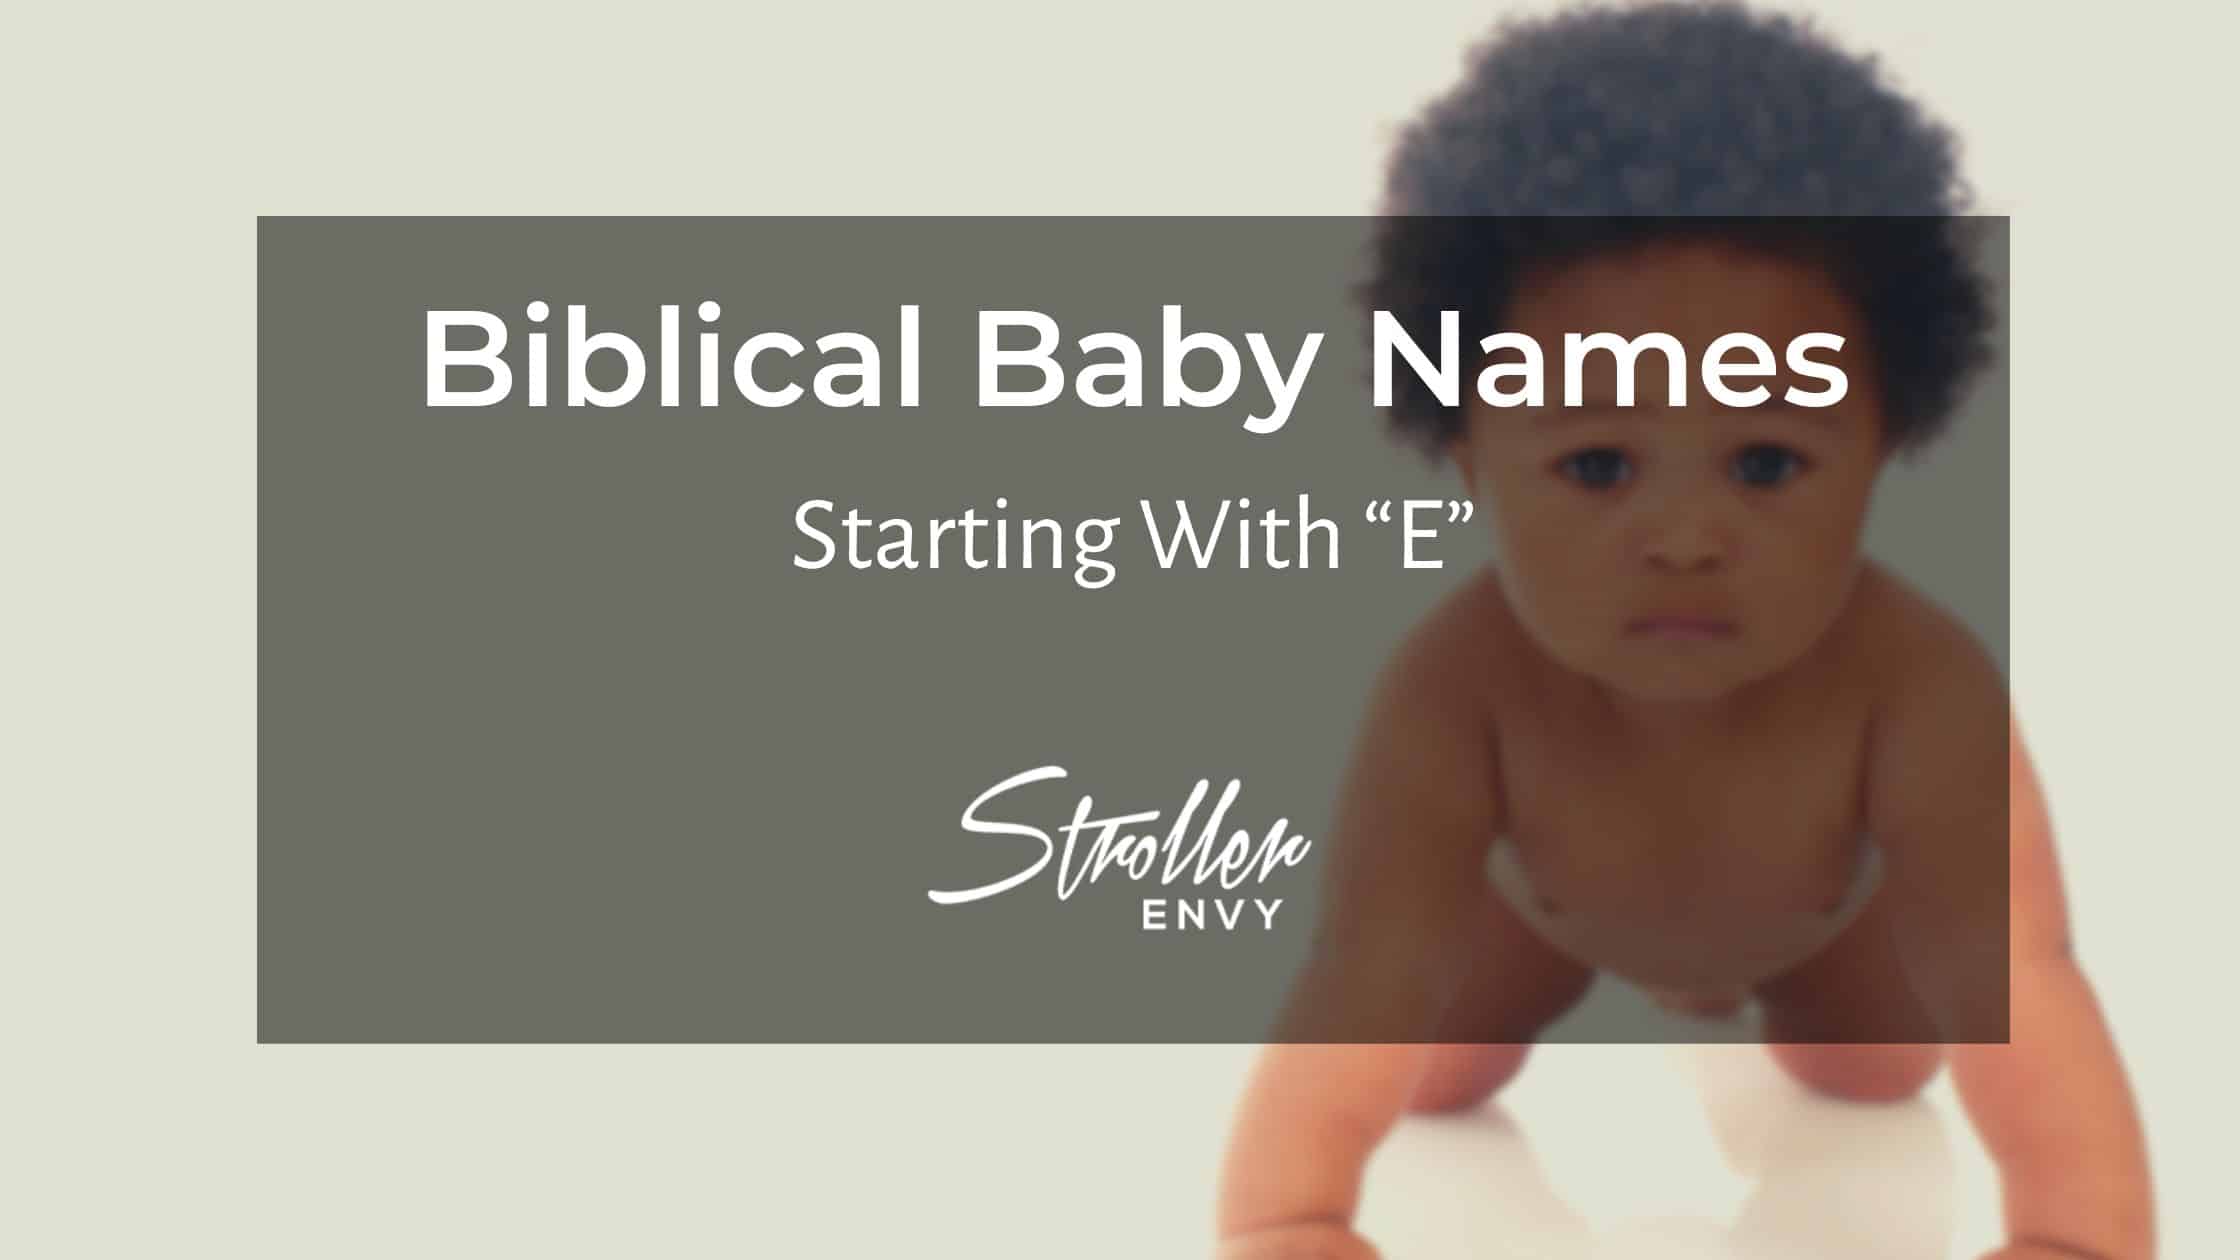 50 biblical baby names beginning with E